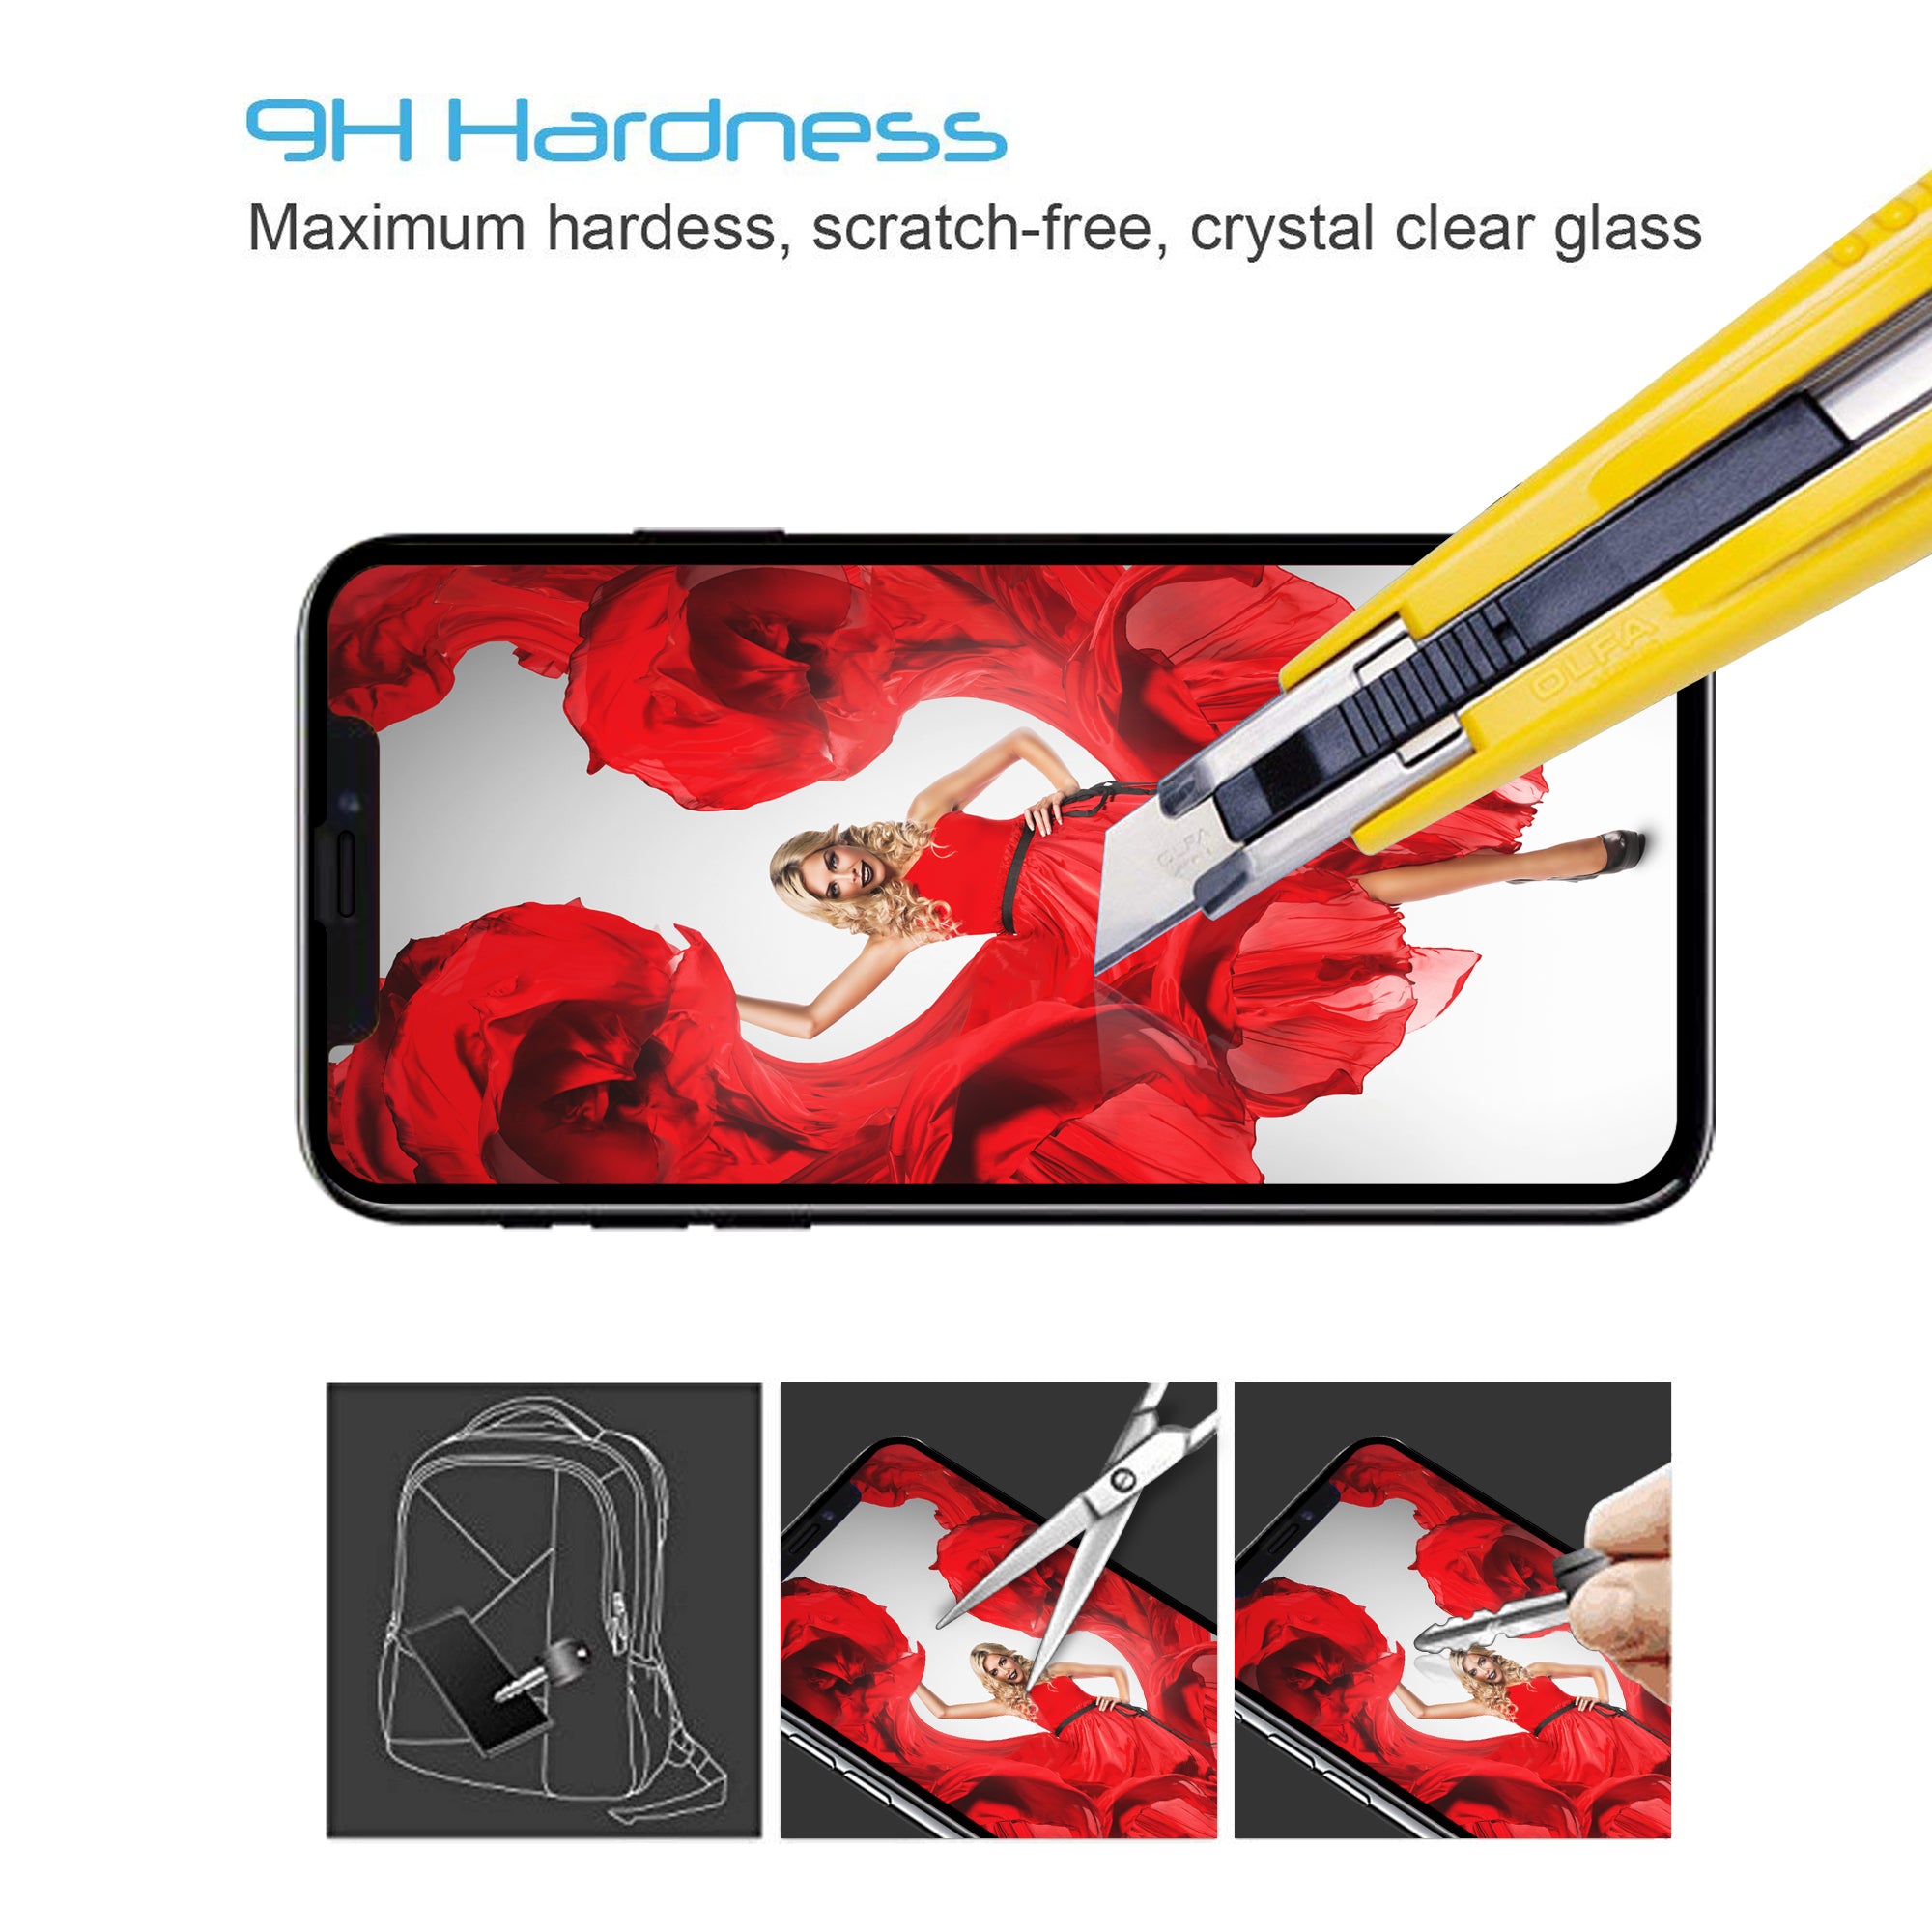 Luvvitt Tempered Glass for iPhone XR with 6.1 inch Screen 2018